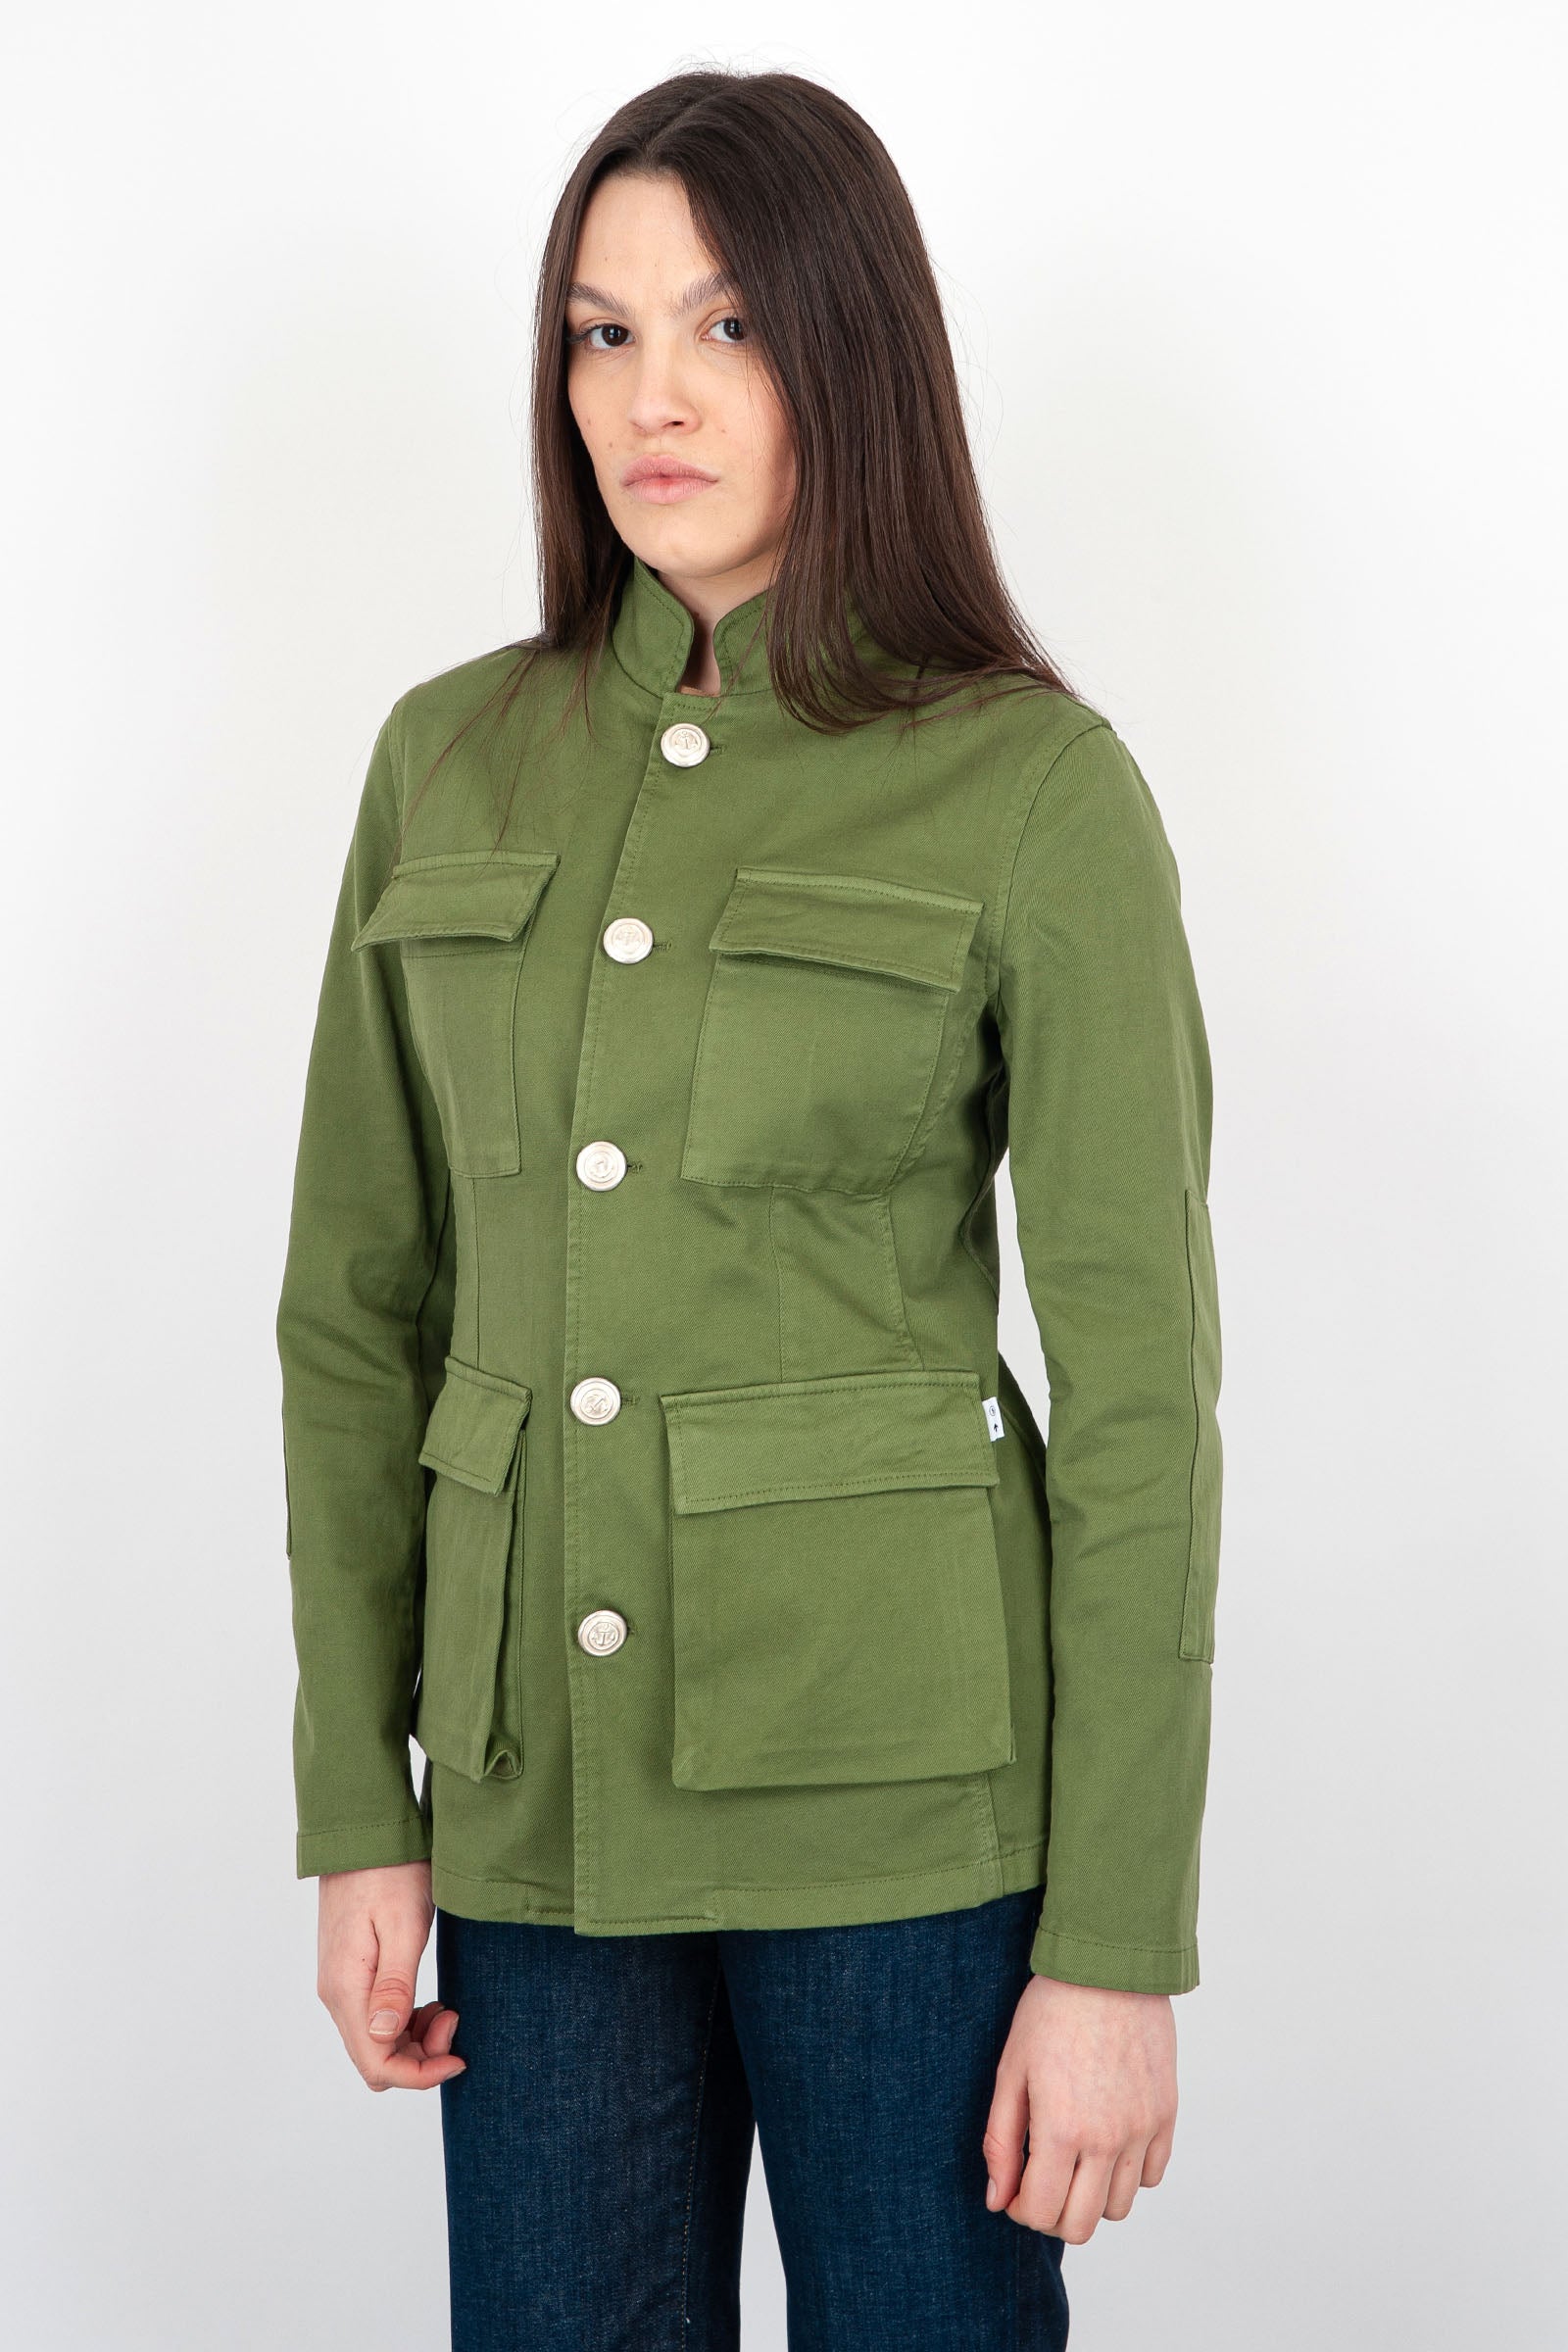 Department Five Green Military Cotton Field Jacket - 3